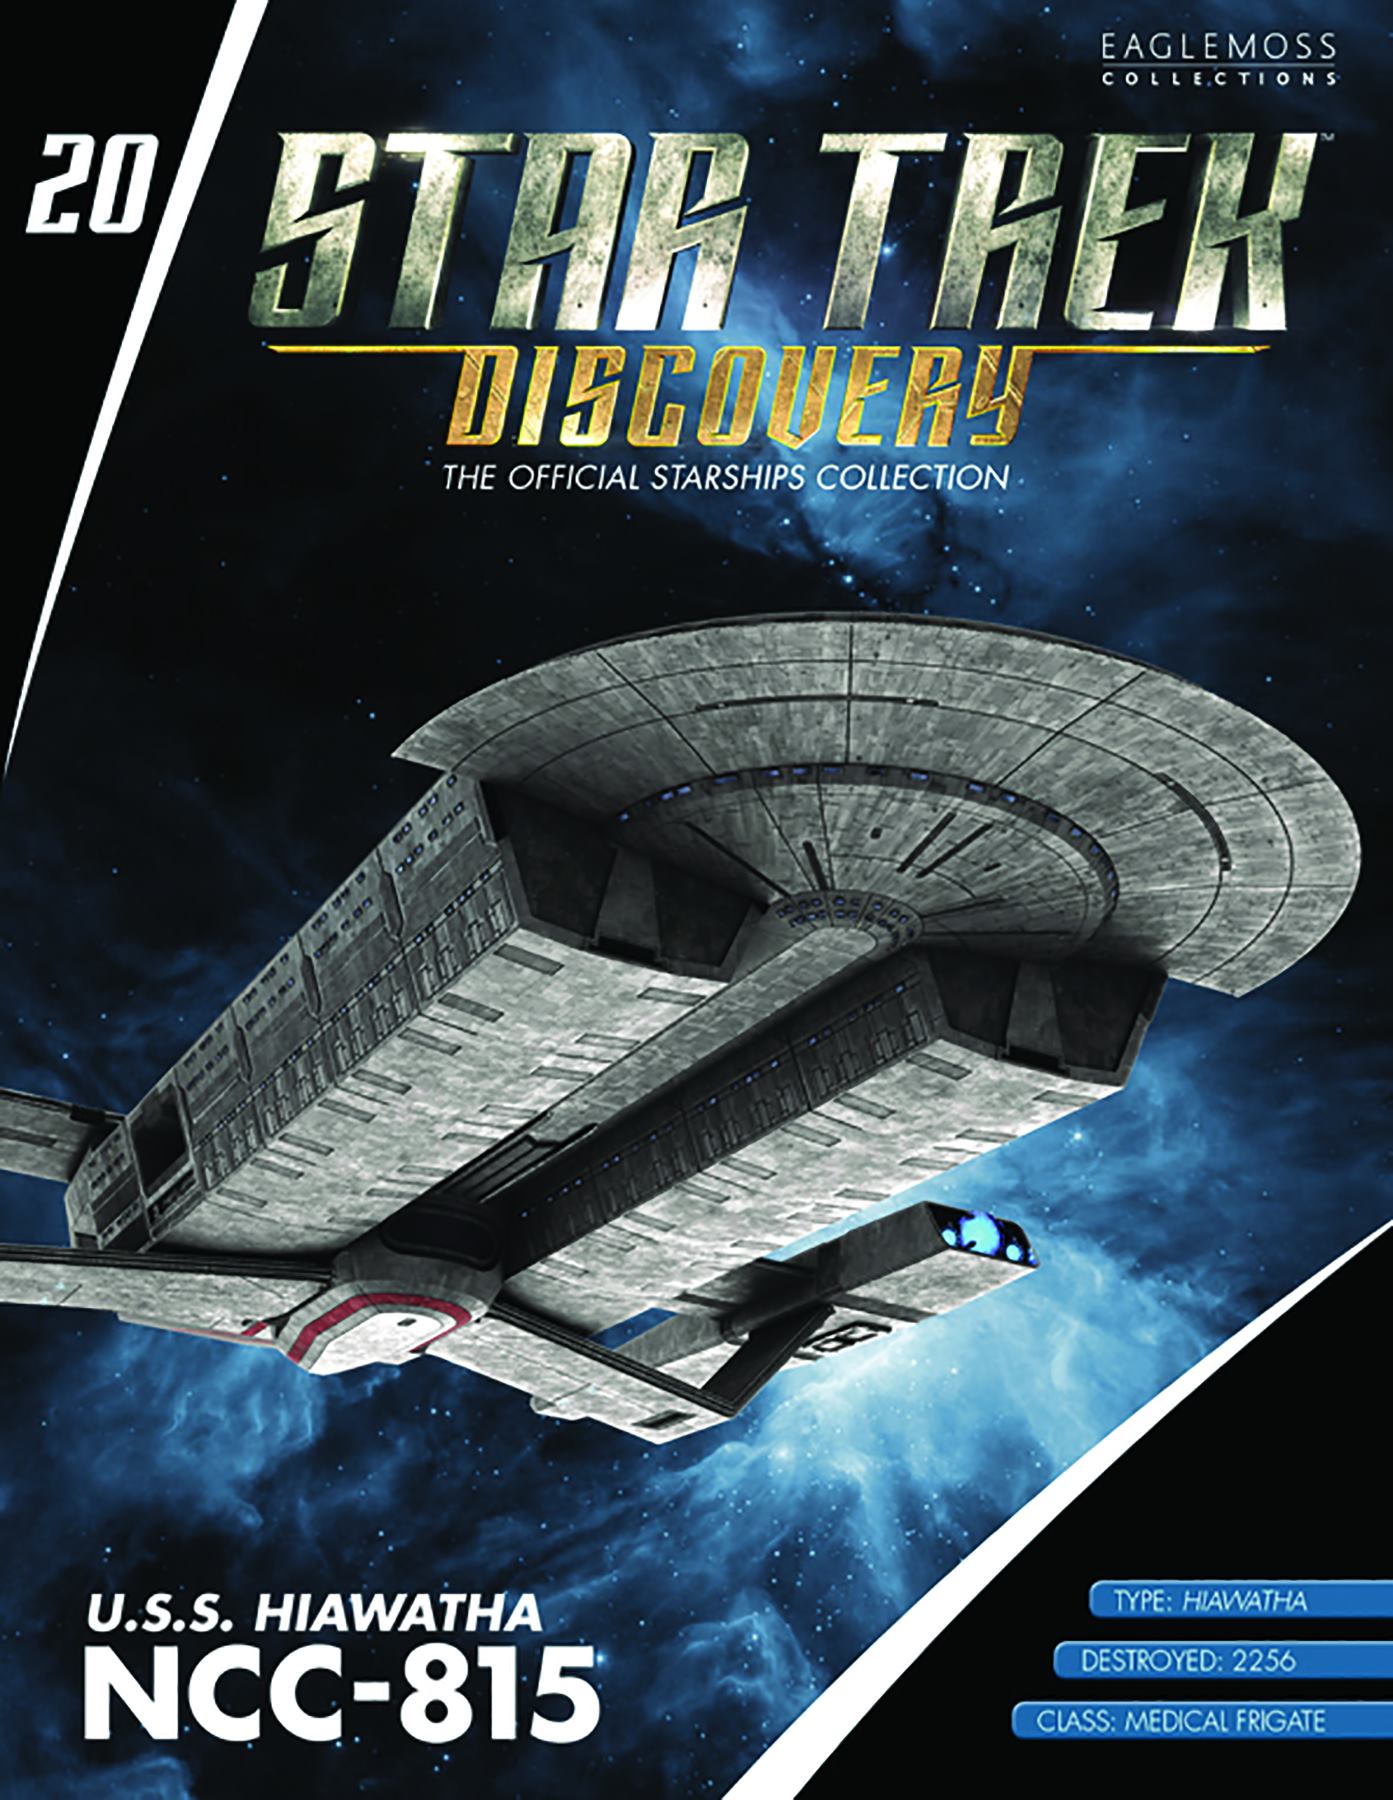 Star Trek: Discovery- The Official Starships Collection #20.jpg